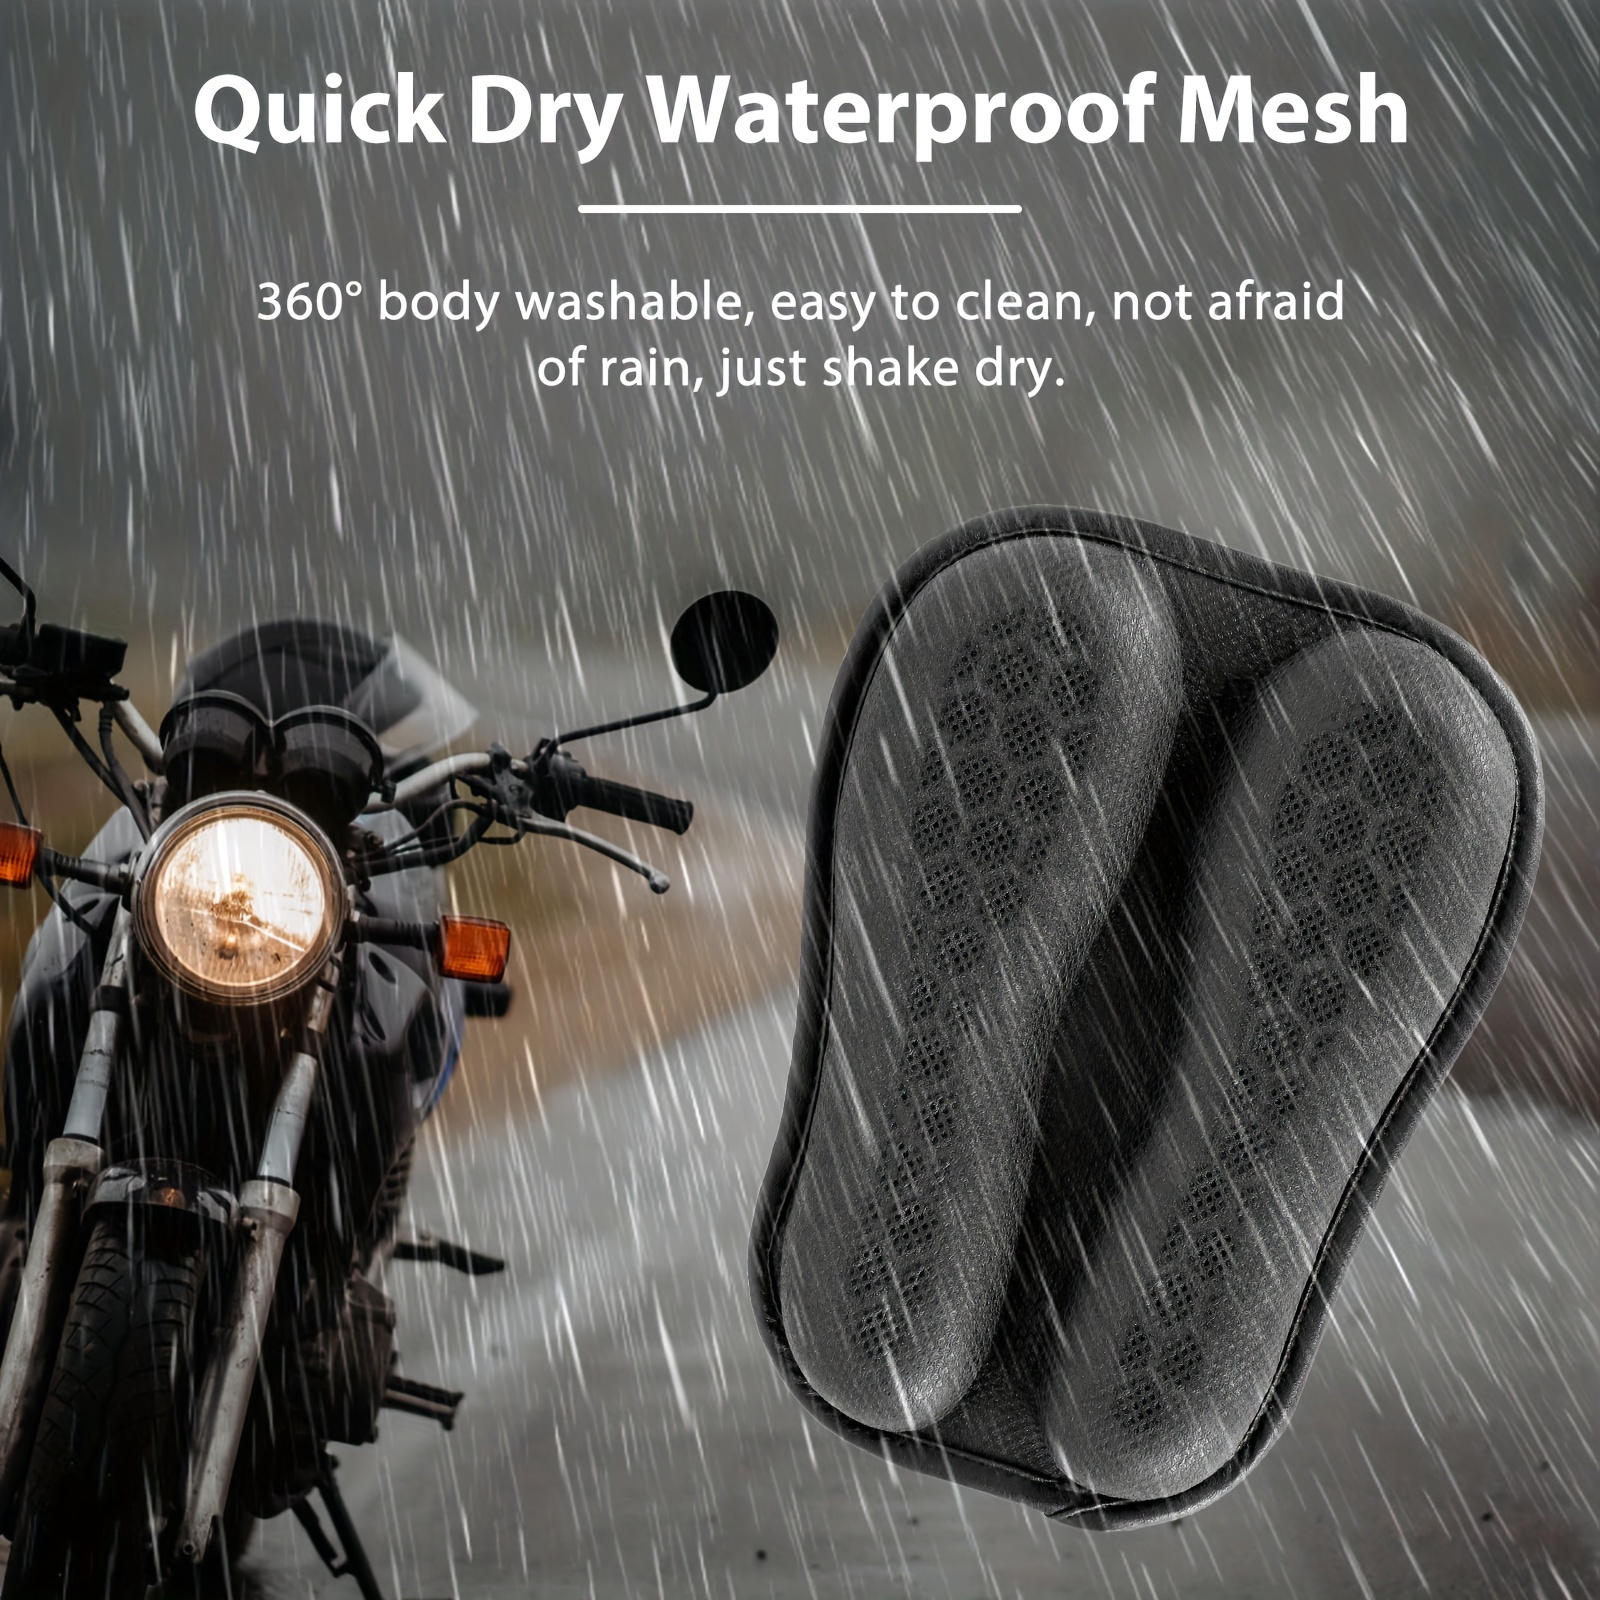 Motorcycle Gel Seat Cushion Foldable, Motorcycle Gel Seat Pad for Long  Rides, Large 3D Honeycomb Structure Shock Absorption Breathable Universal